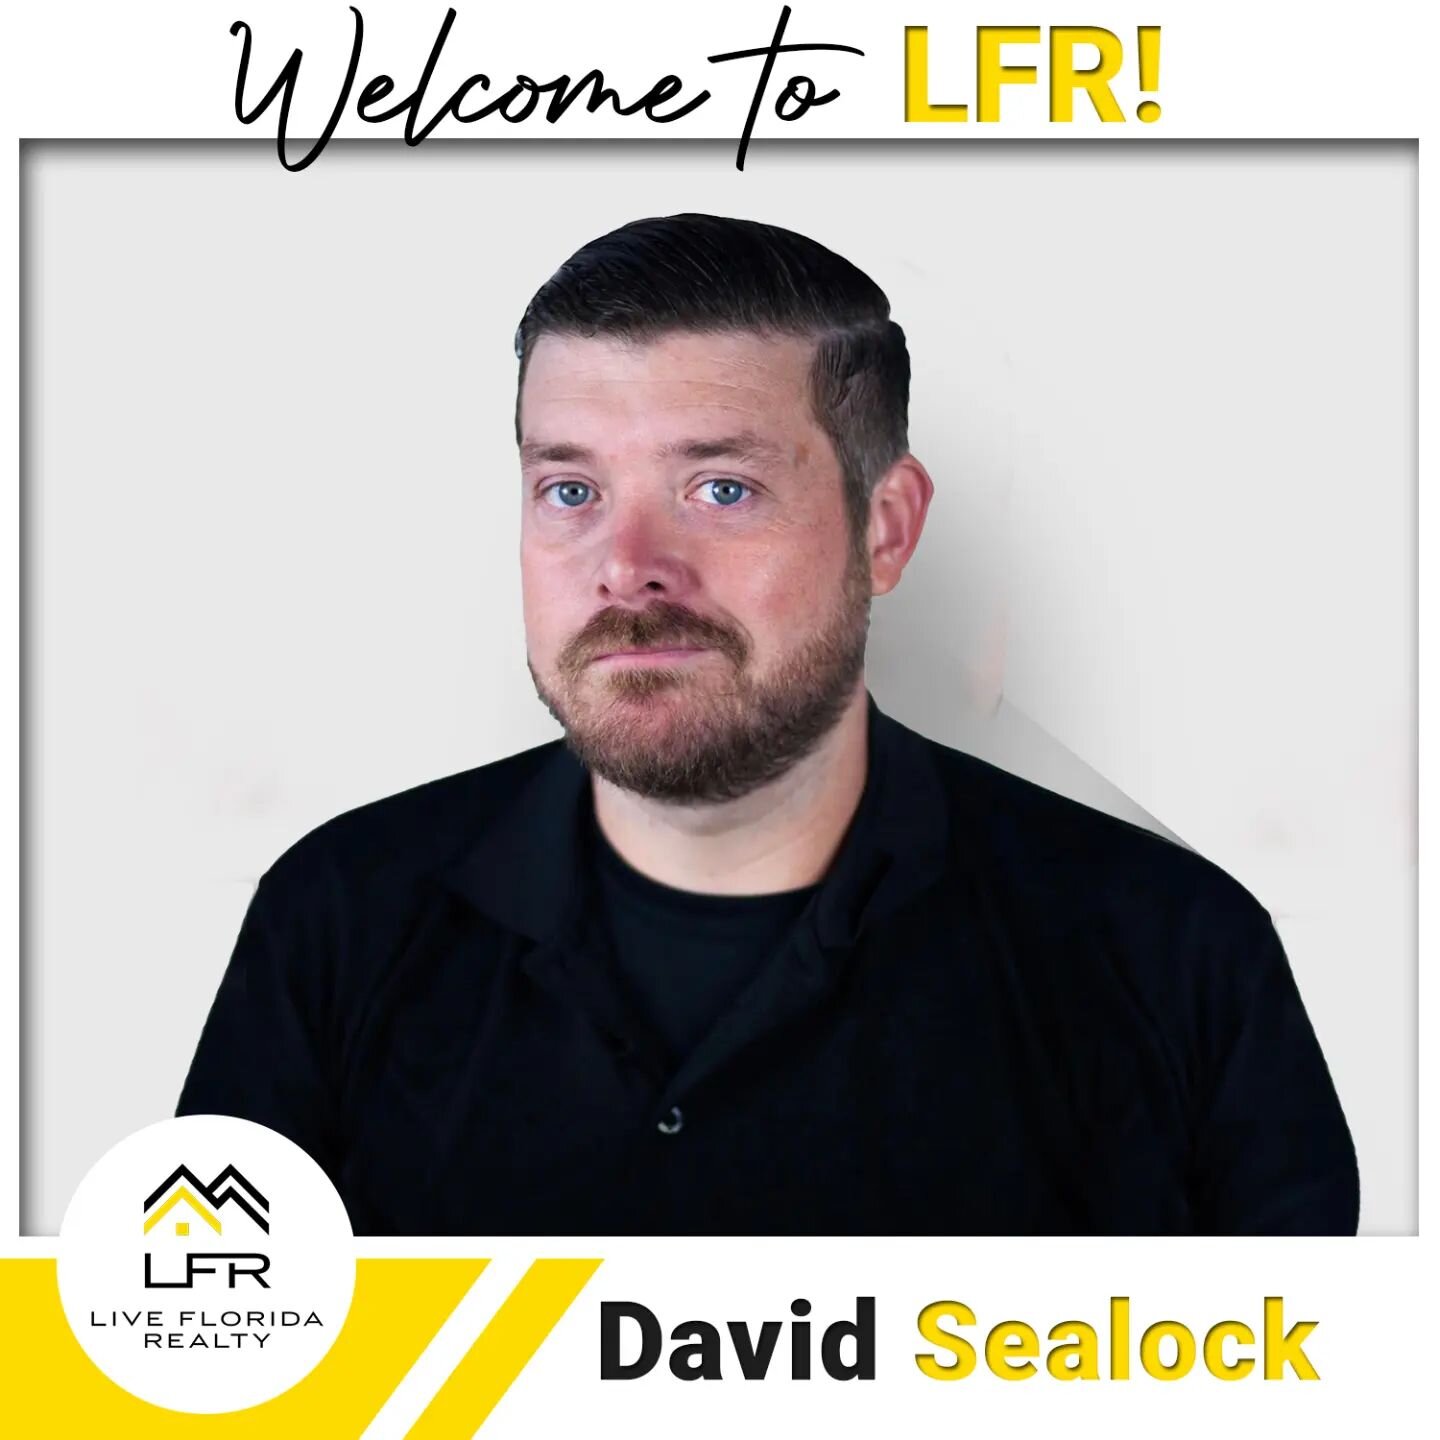 My name is David Sealock and I am a professional Real Estate Agent with Live Florida Realty. I am a native of Winchester, Virginia but moved to Lakeland when I was 12 years old so I got to grow up here! I began my working career in various management